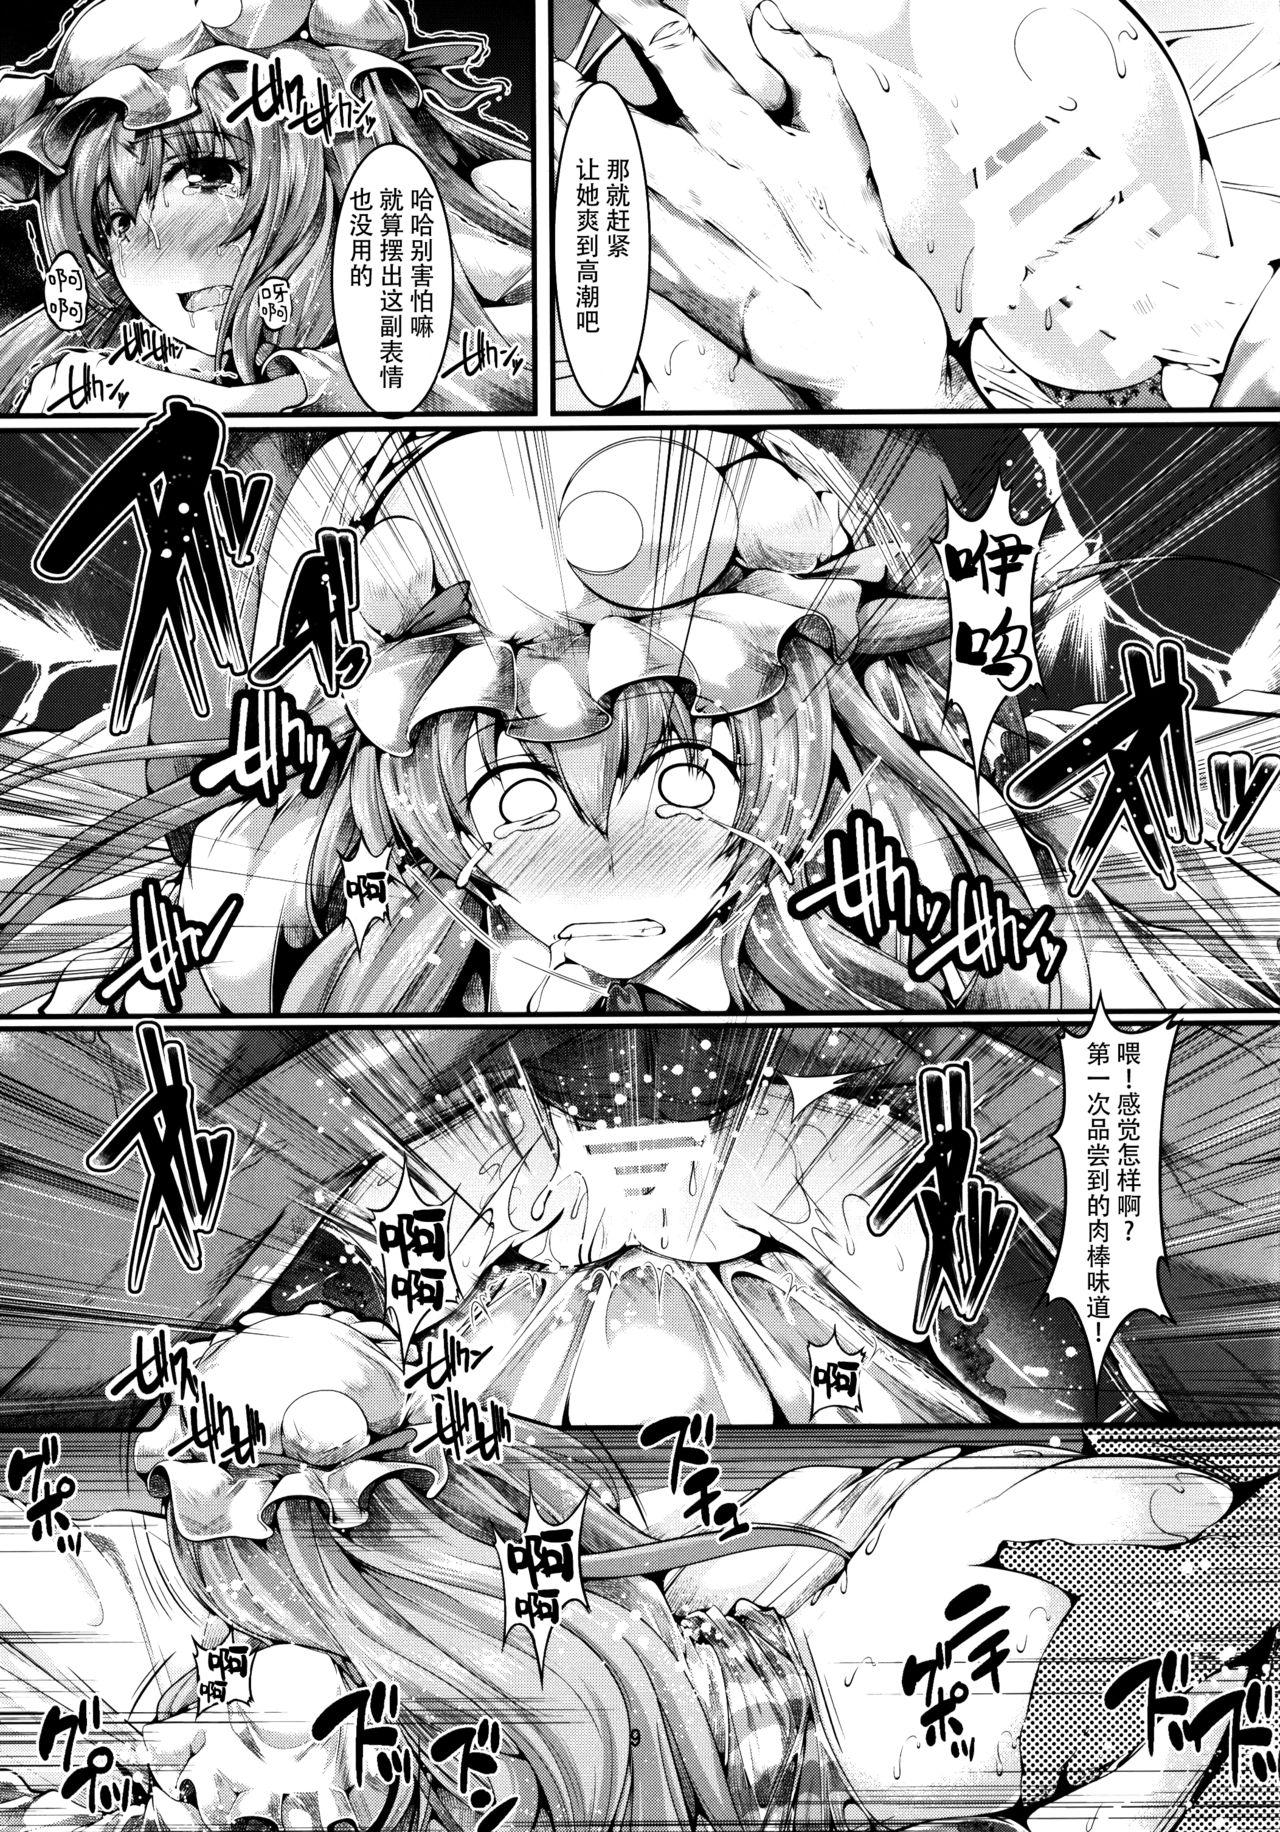 Deflowered NO! NO! KNOWLEDGE! - Touhou project Cream Pie - Page 8